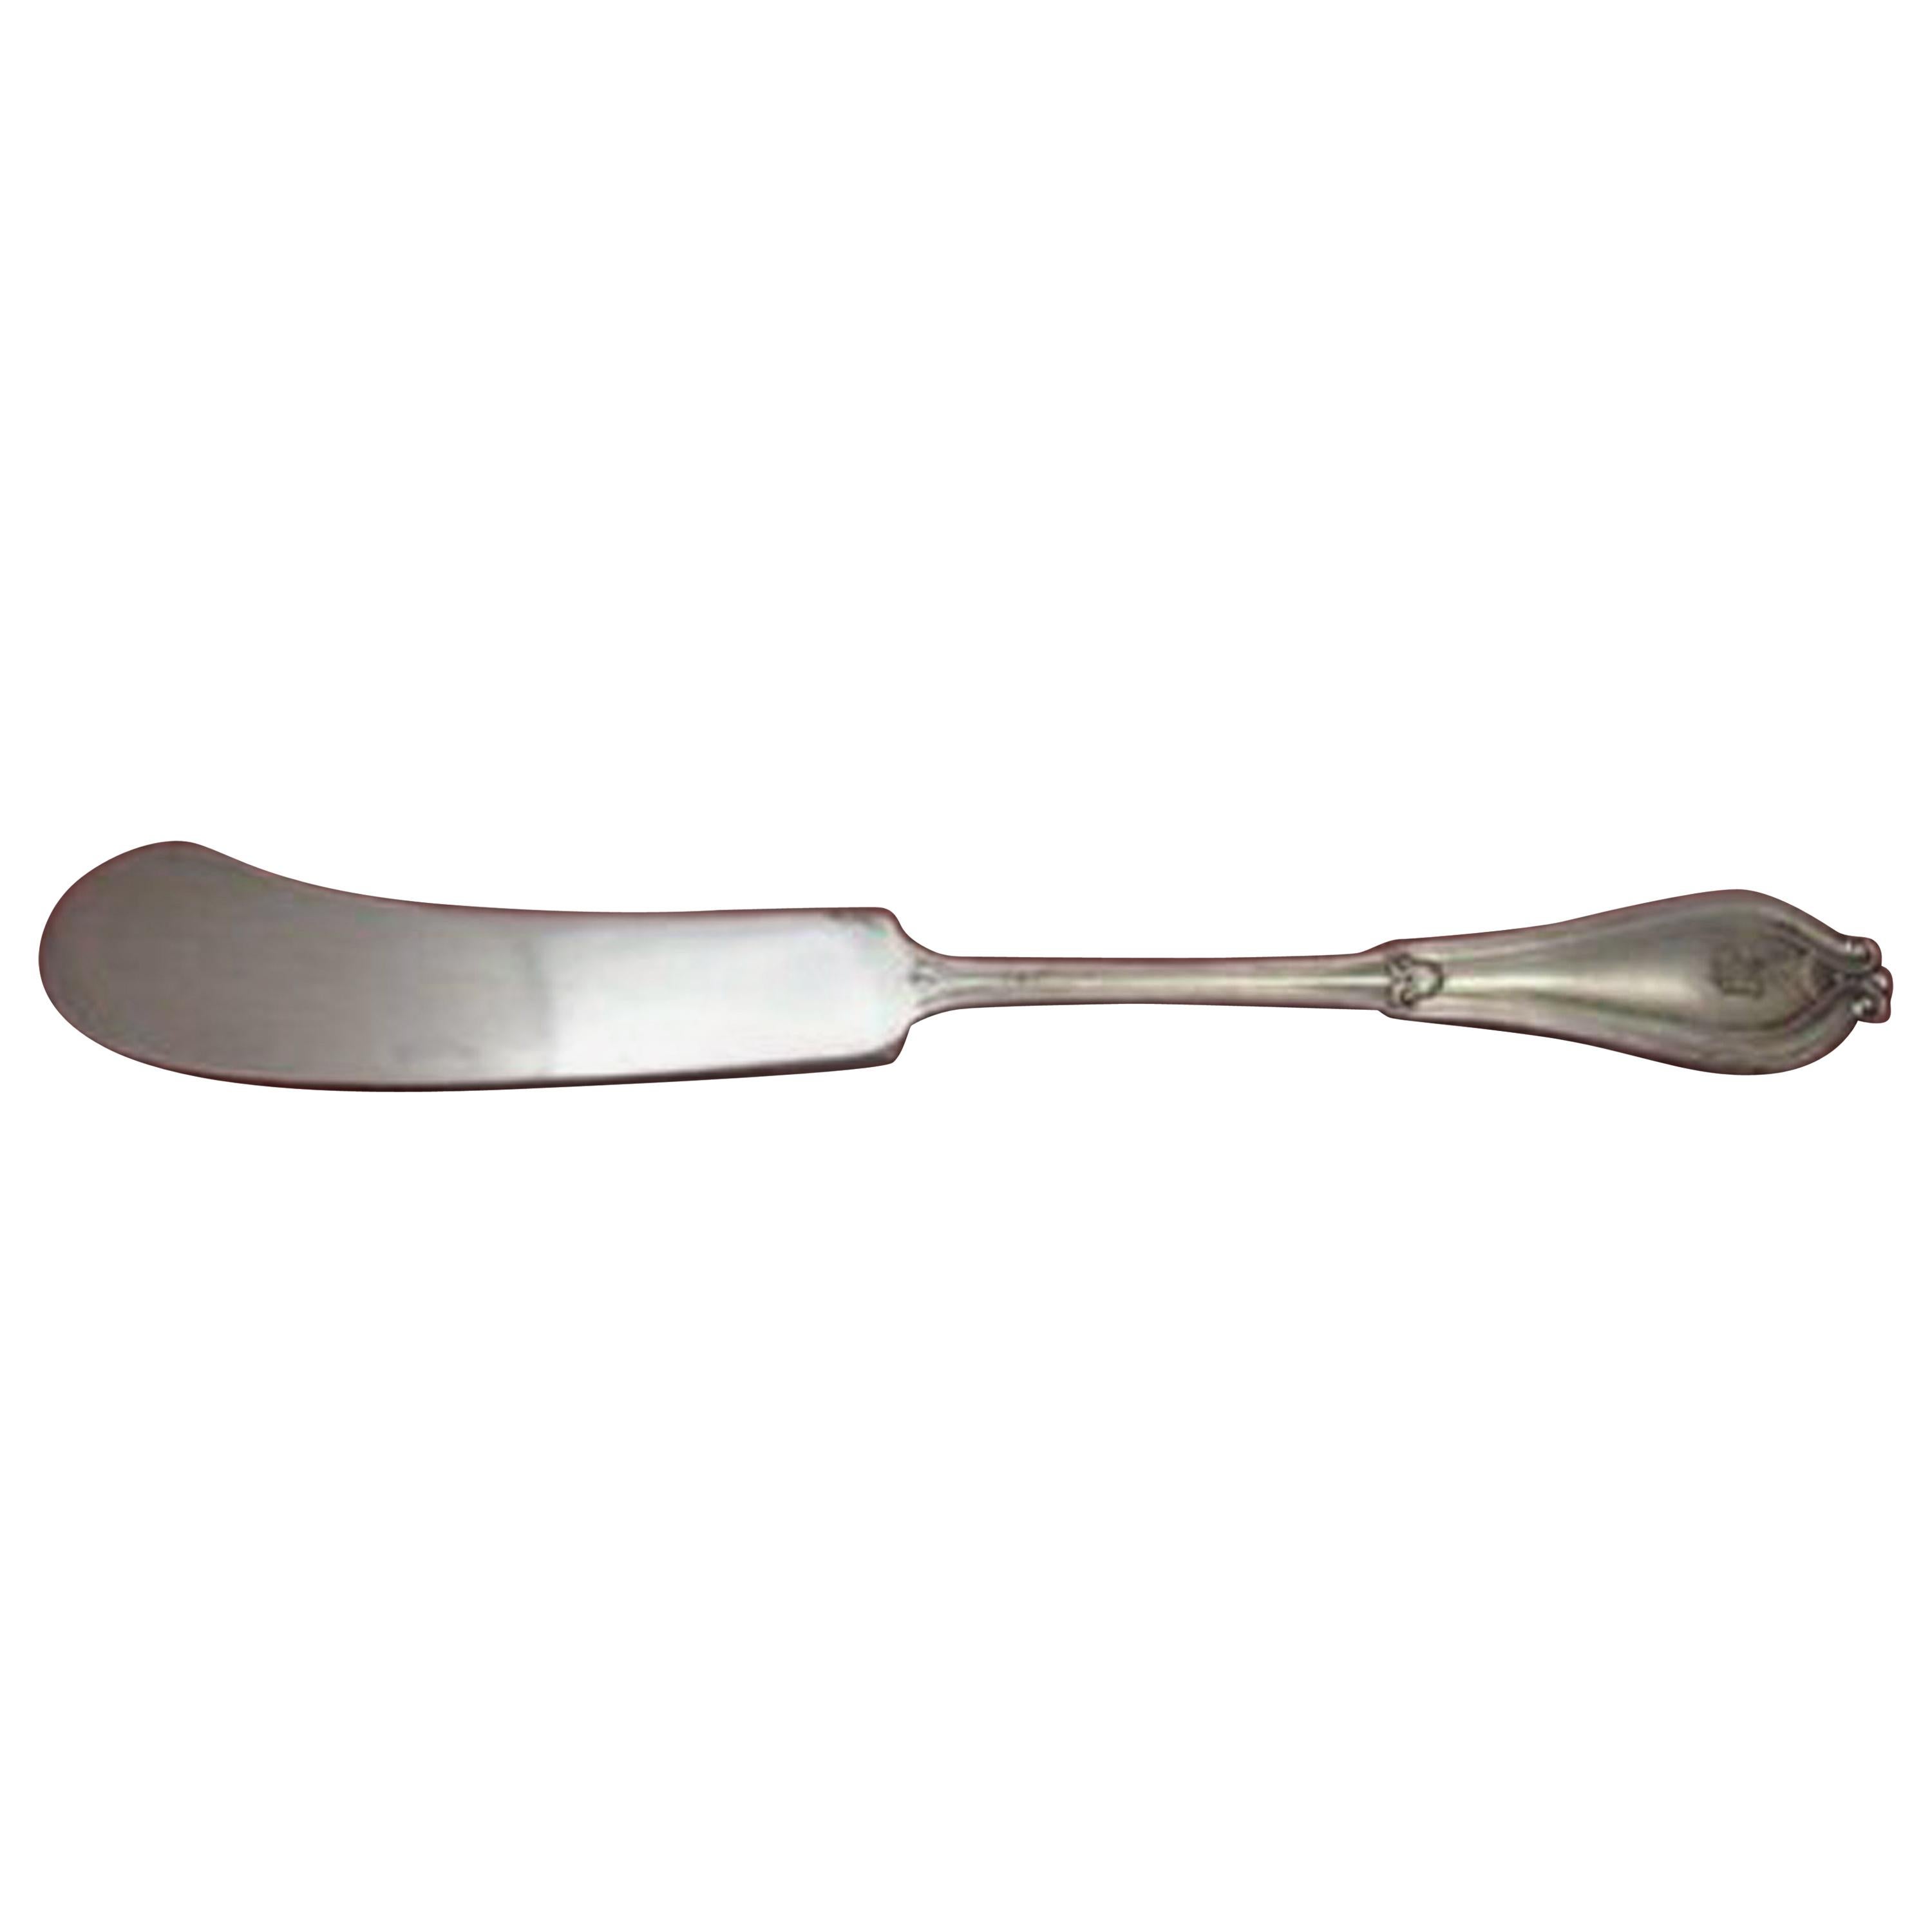 Whittier by Tiffany & Co. Silver Plate Silver Plated Master Butter Flat Handle